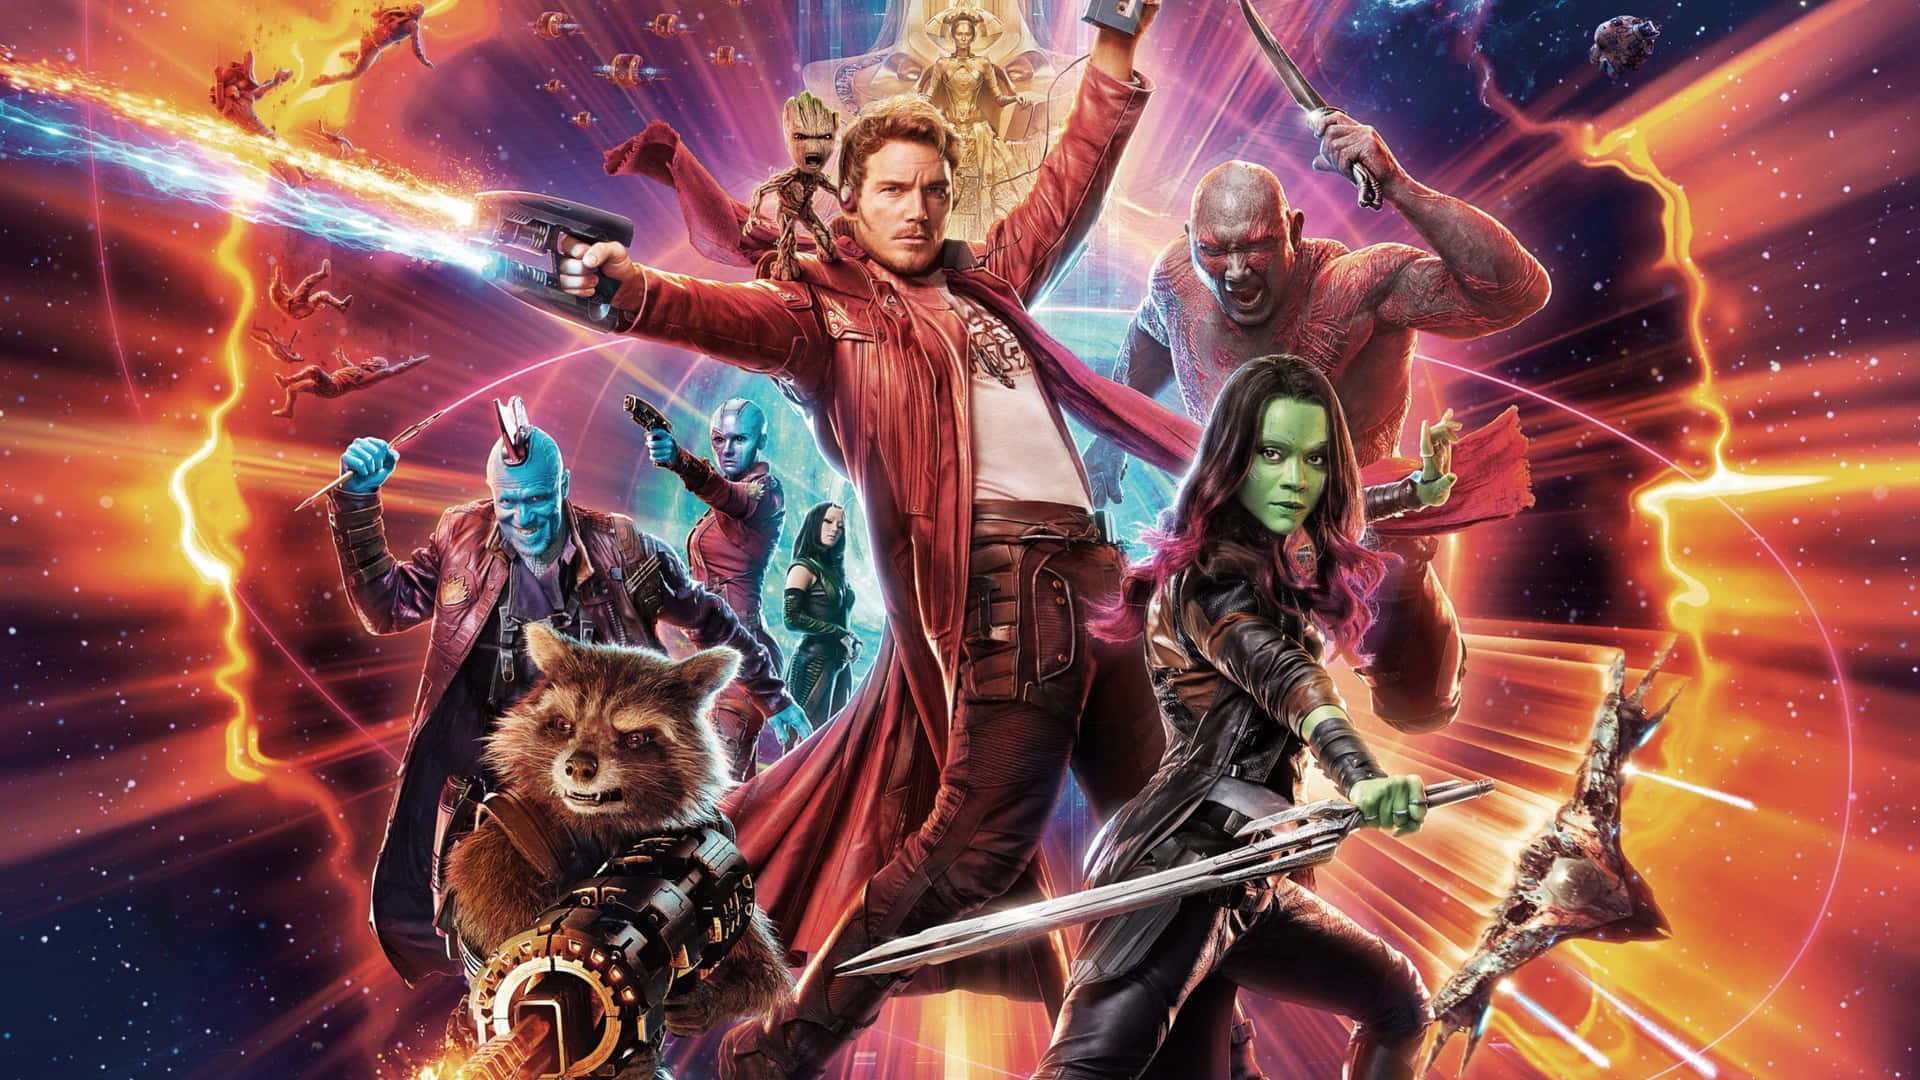 Gadgets, Groot and Guns: Star-Lord and the Guardians return for an awesomely-action-packed adventure Wallpaper